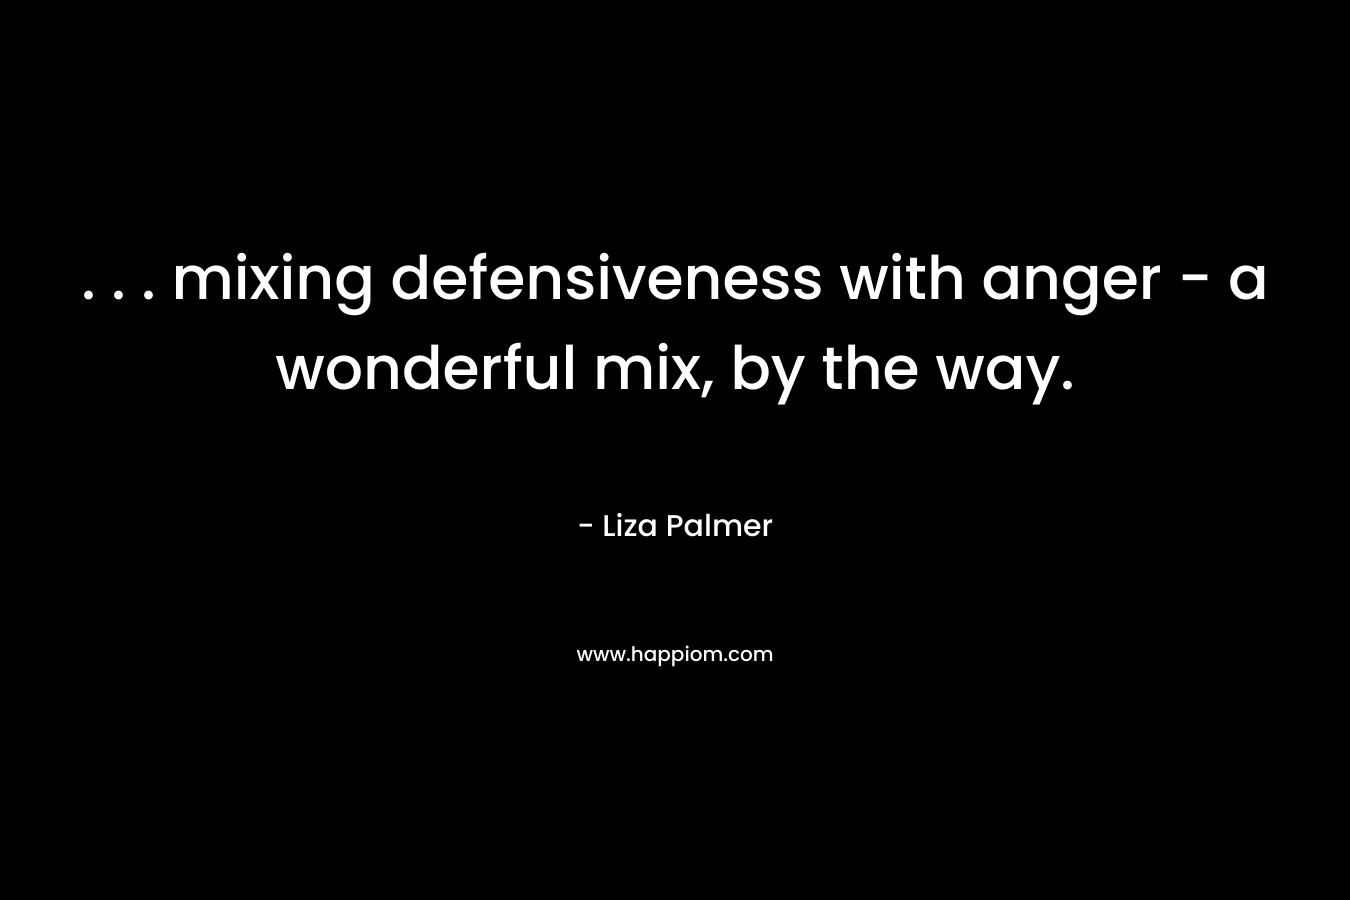 . . . mixing defensiveness with anger – a wonderful mix, by the way. – Liza Palmer